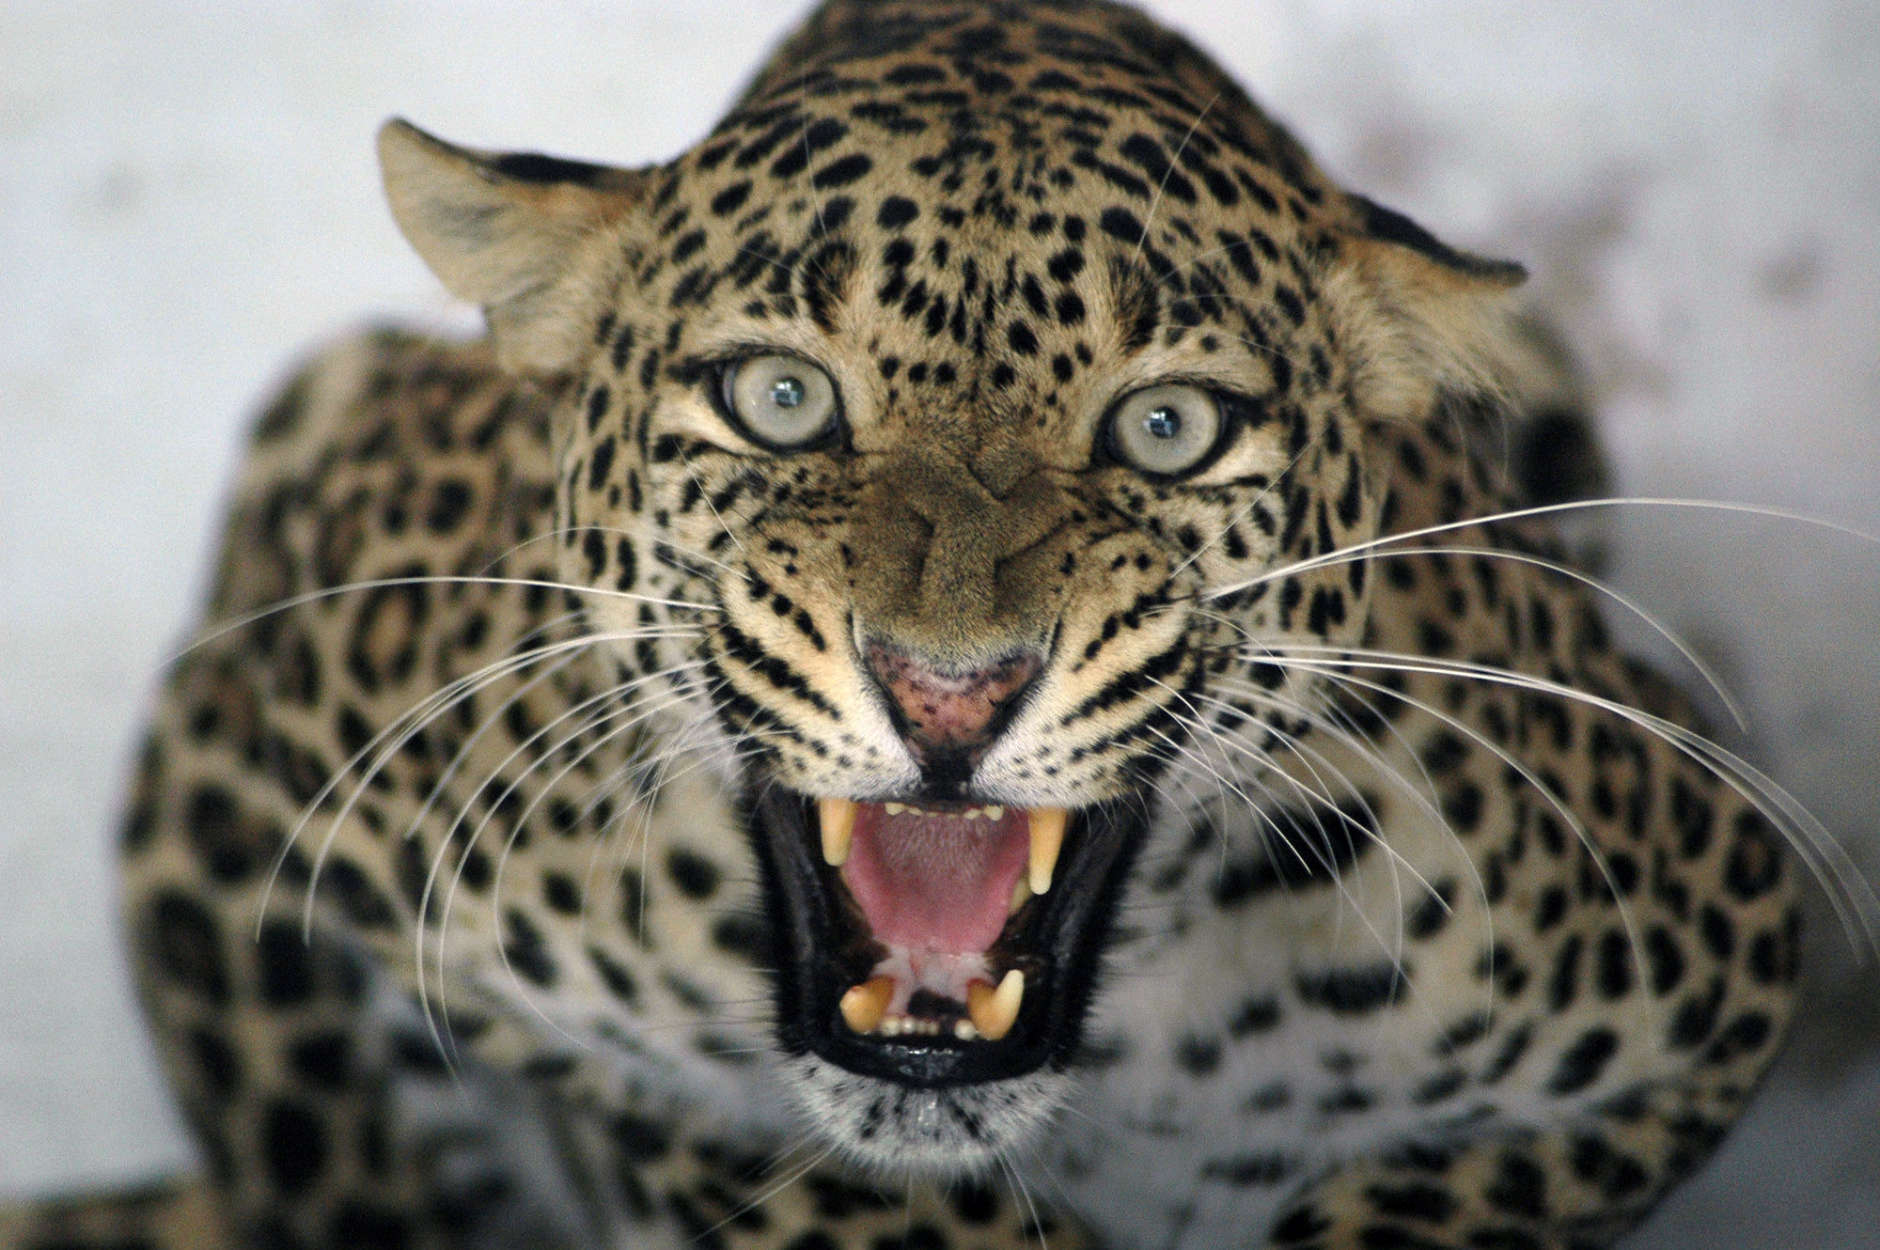 A panther reacts from its enclosure at the zoo in Ahmadabad, India, Tuesday, May 5, 2009. (AP Photo/Ajit Solanki)